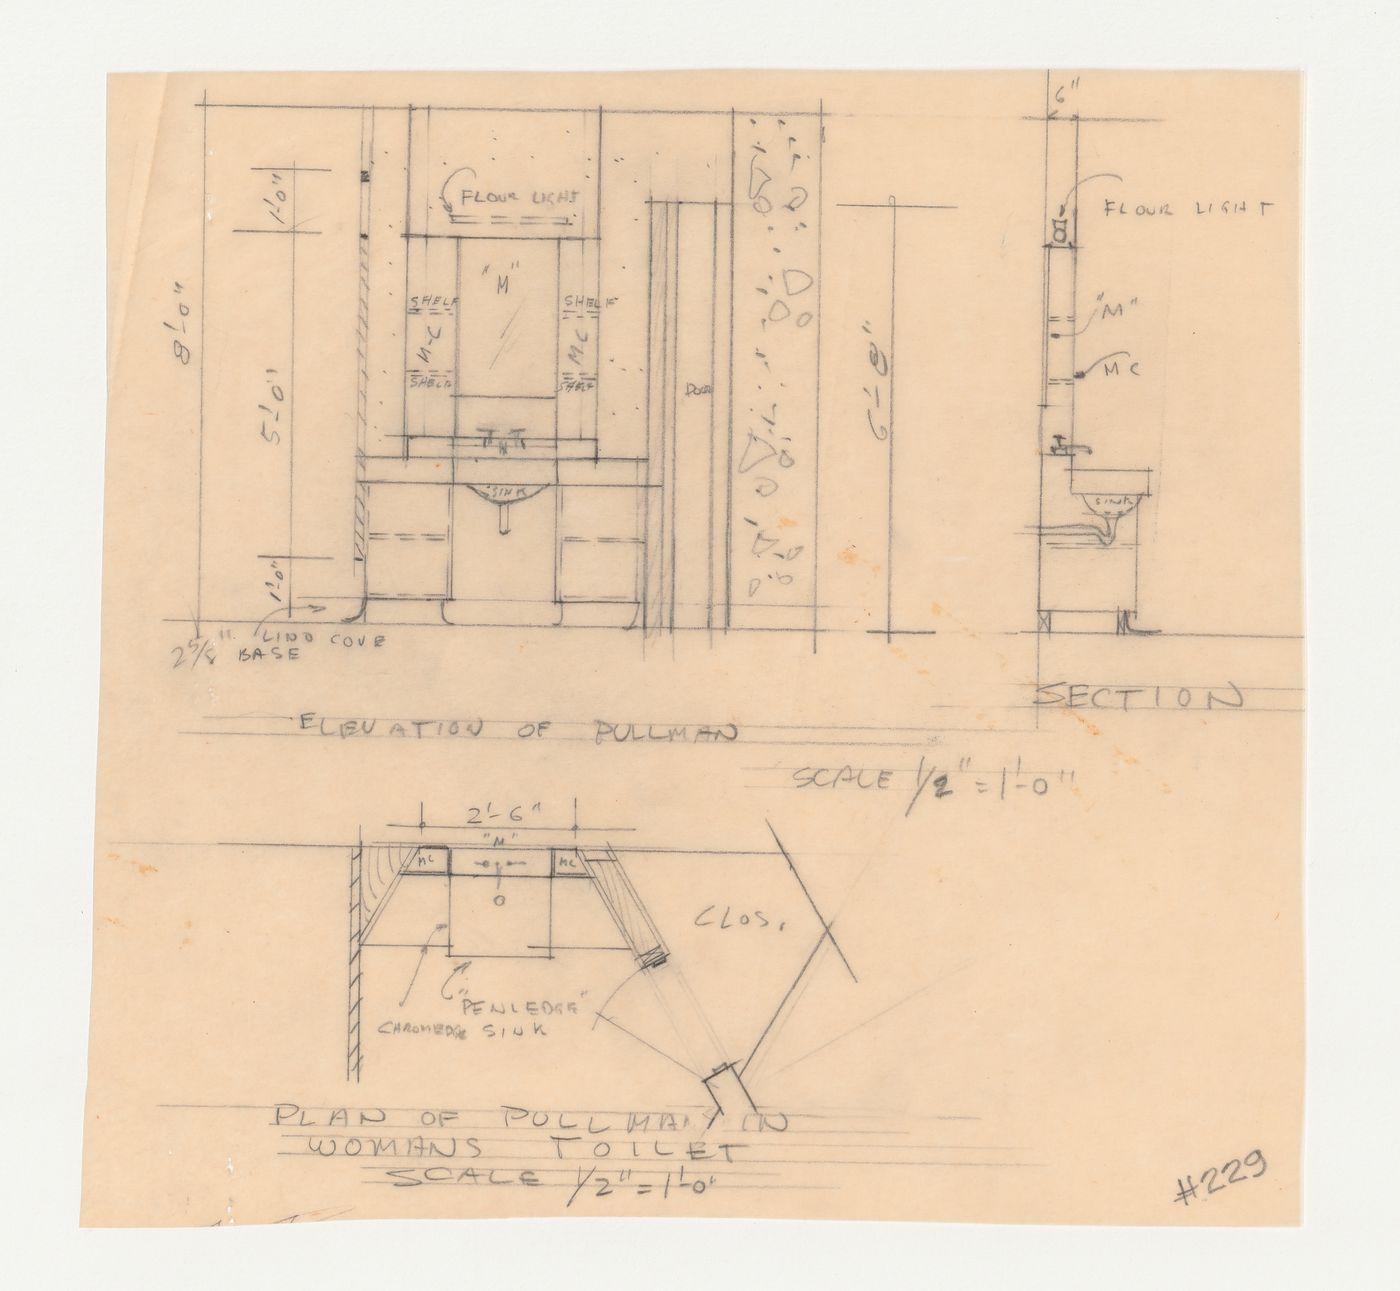 Wayfarers' Chapel, Palos Verdes, California: Plan, elevation and section for the women's rest room sink, possibly for the vestry